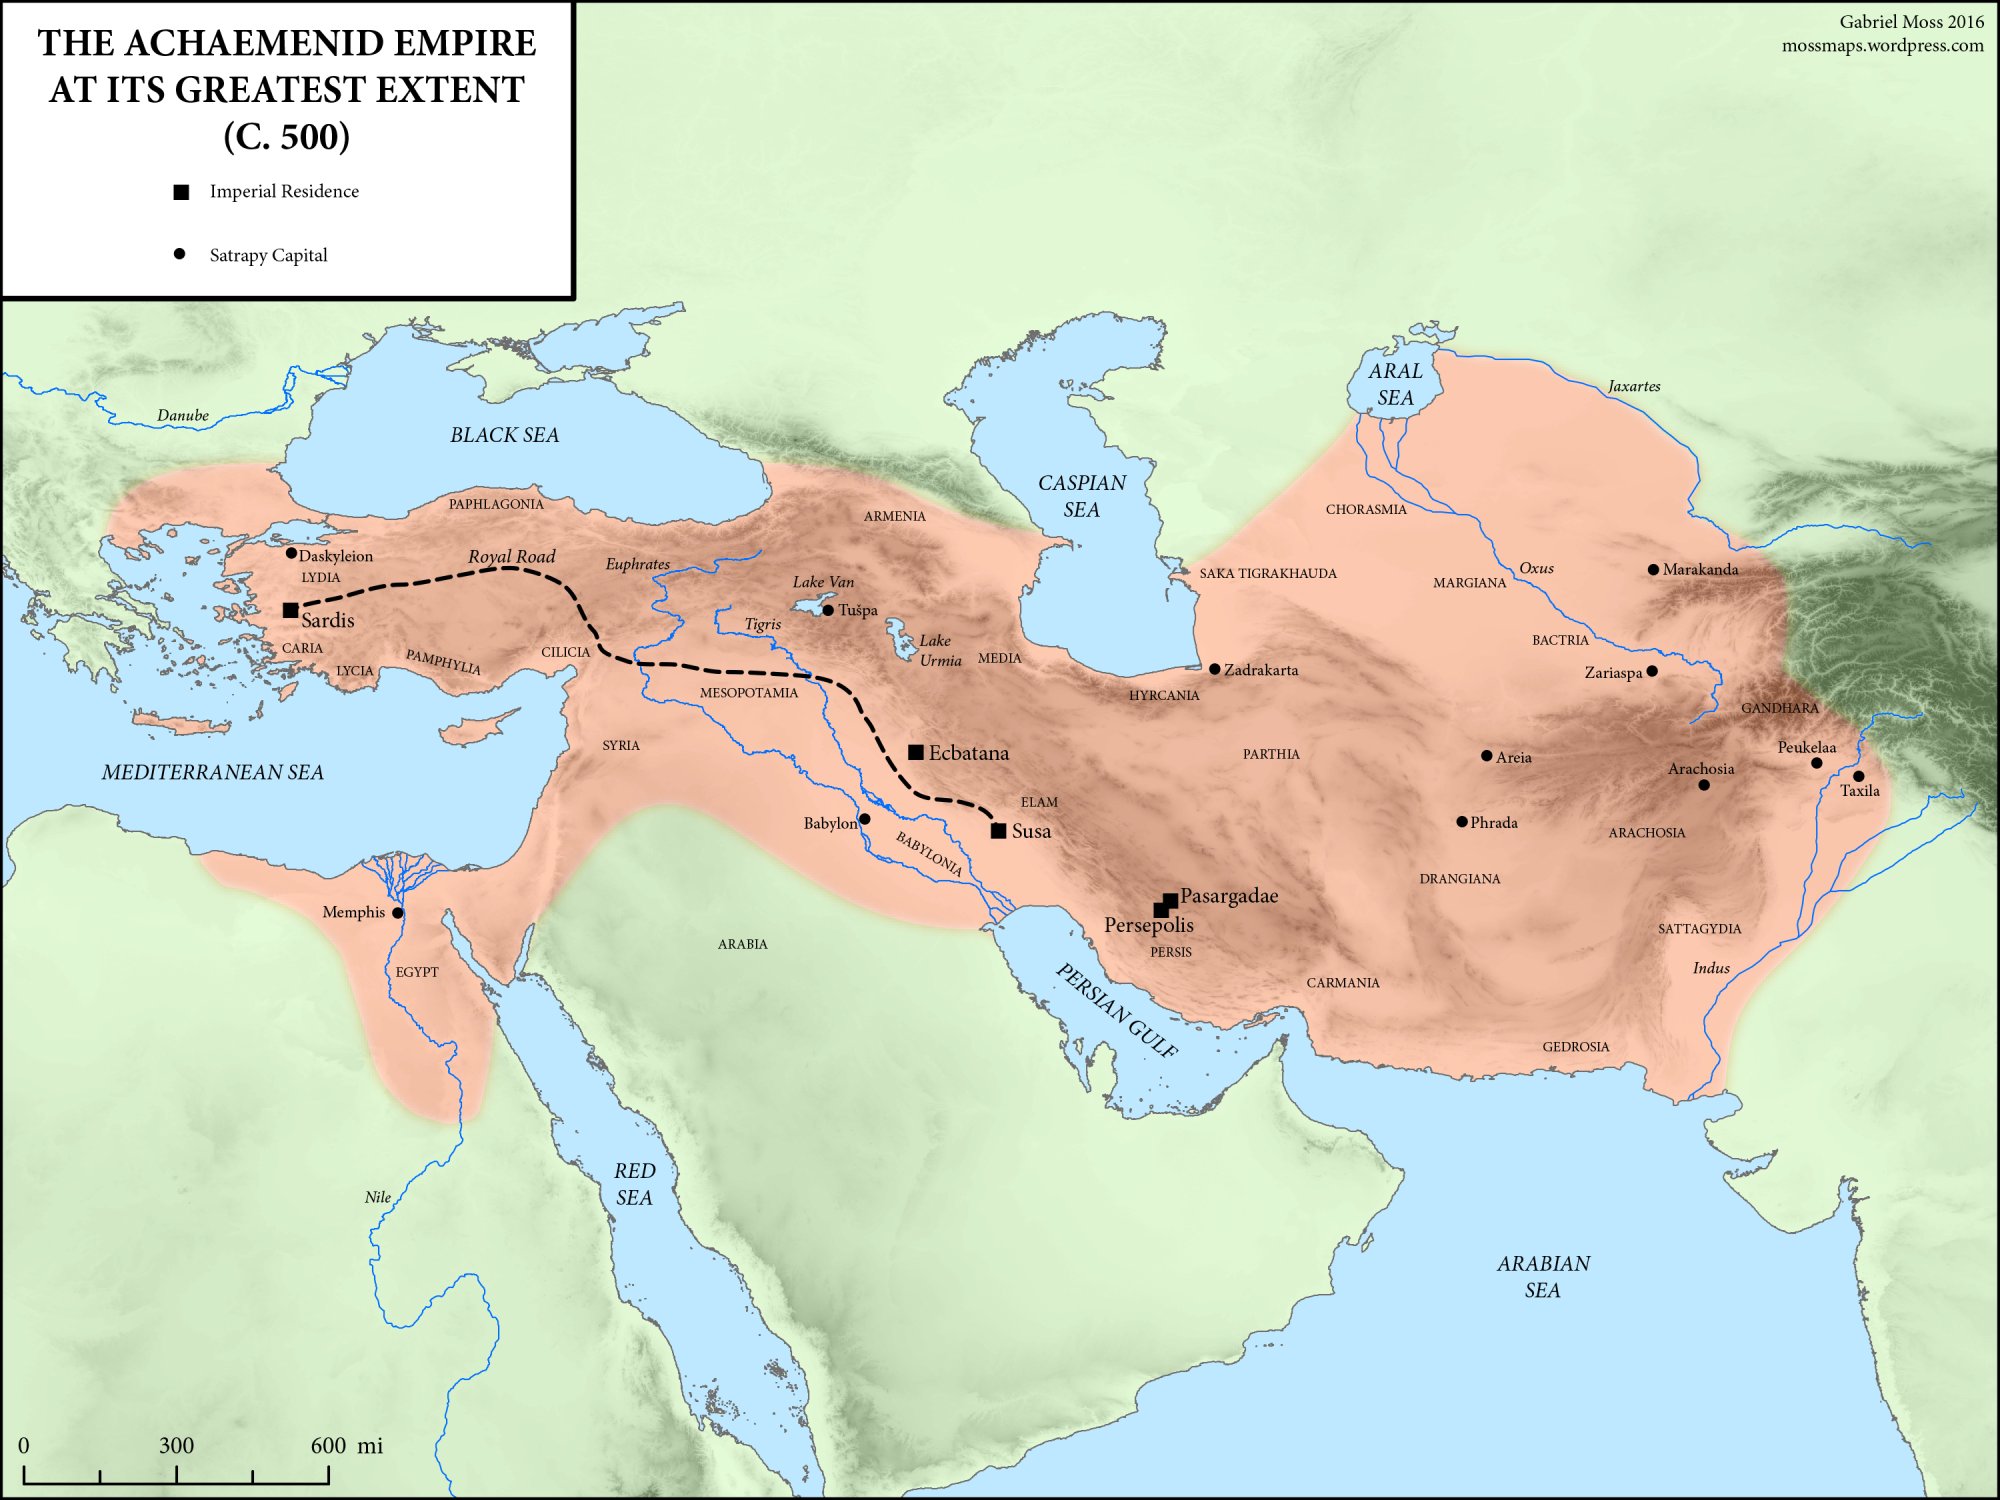 The_Achaemenid_Empire_at_its_Greatest_Extent.jpg